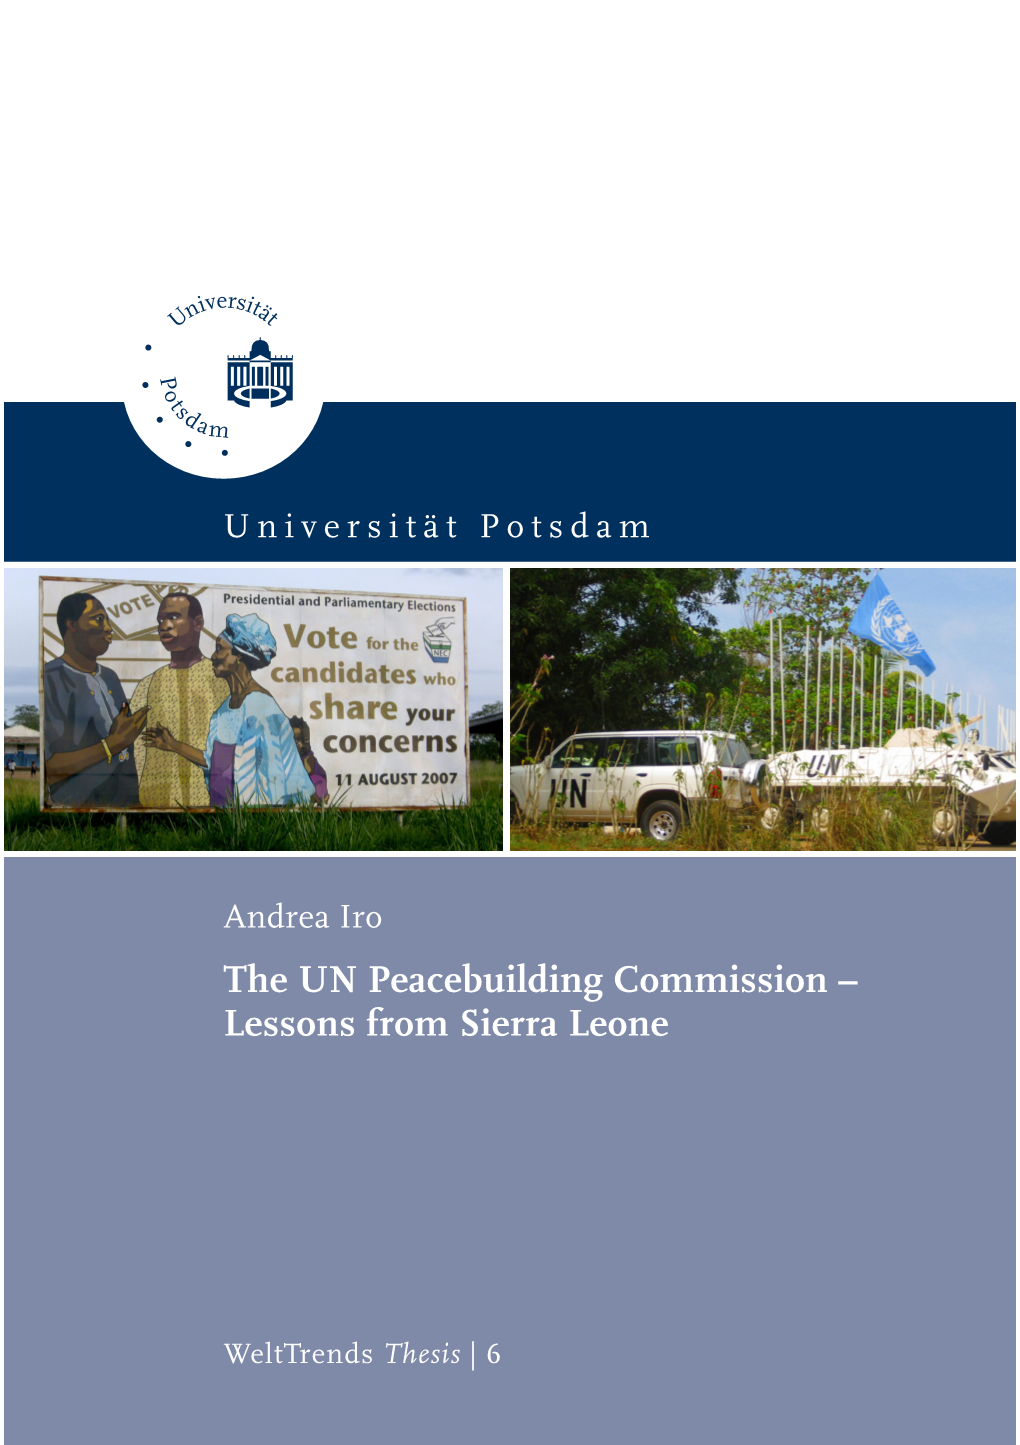 The UN Peacebuilding Commission – Lessons from Sierra Leone